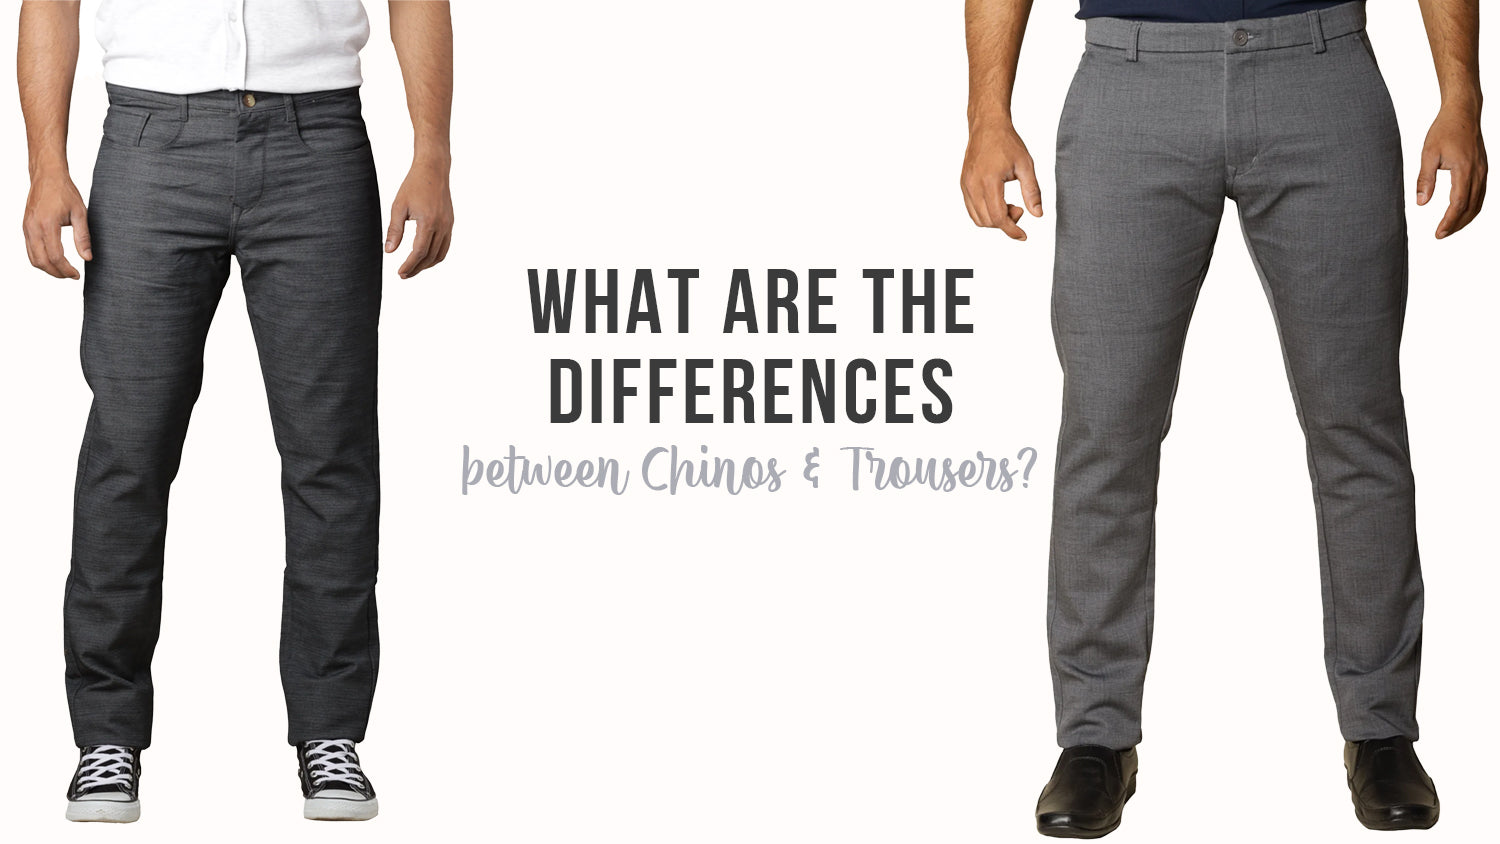 Chinos vs Jeans - Which Are Better To Wear? | Michael 84